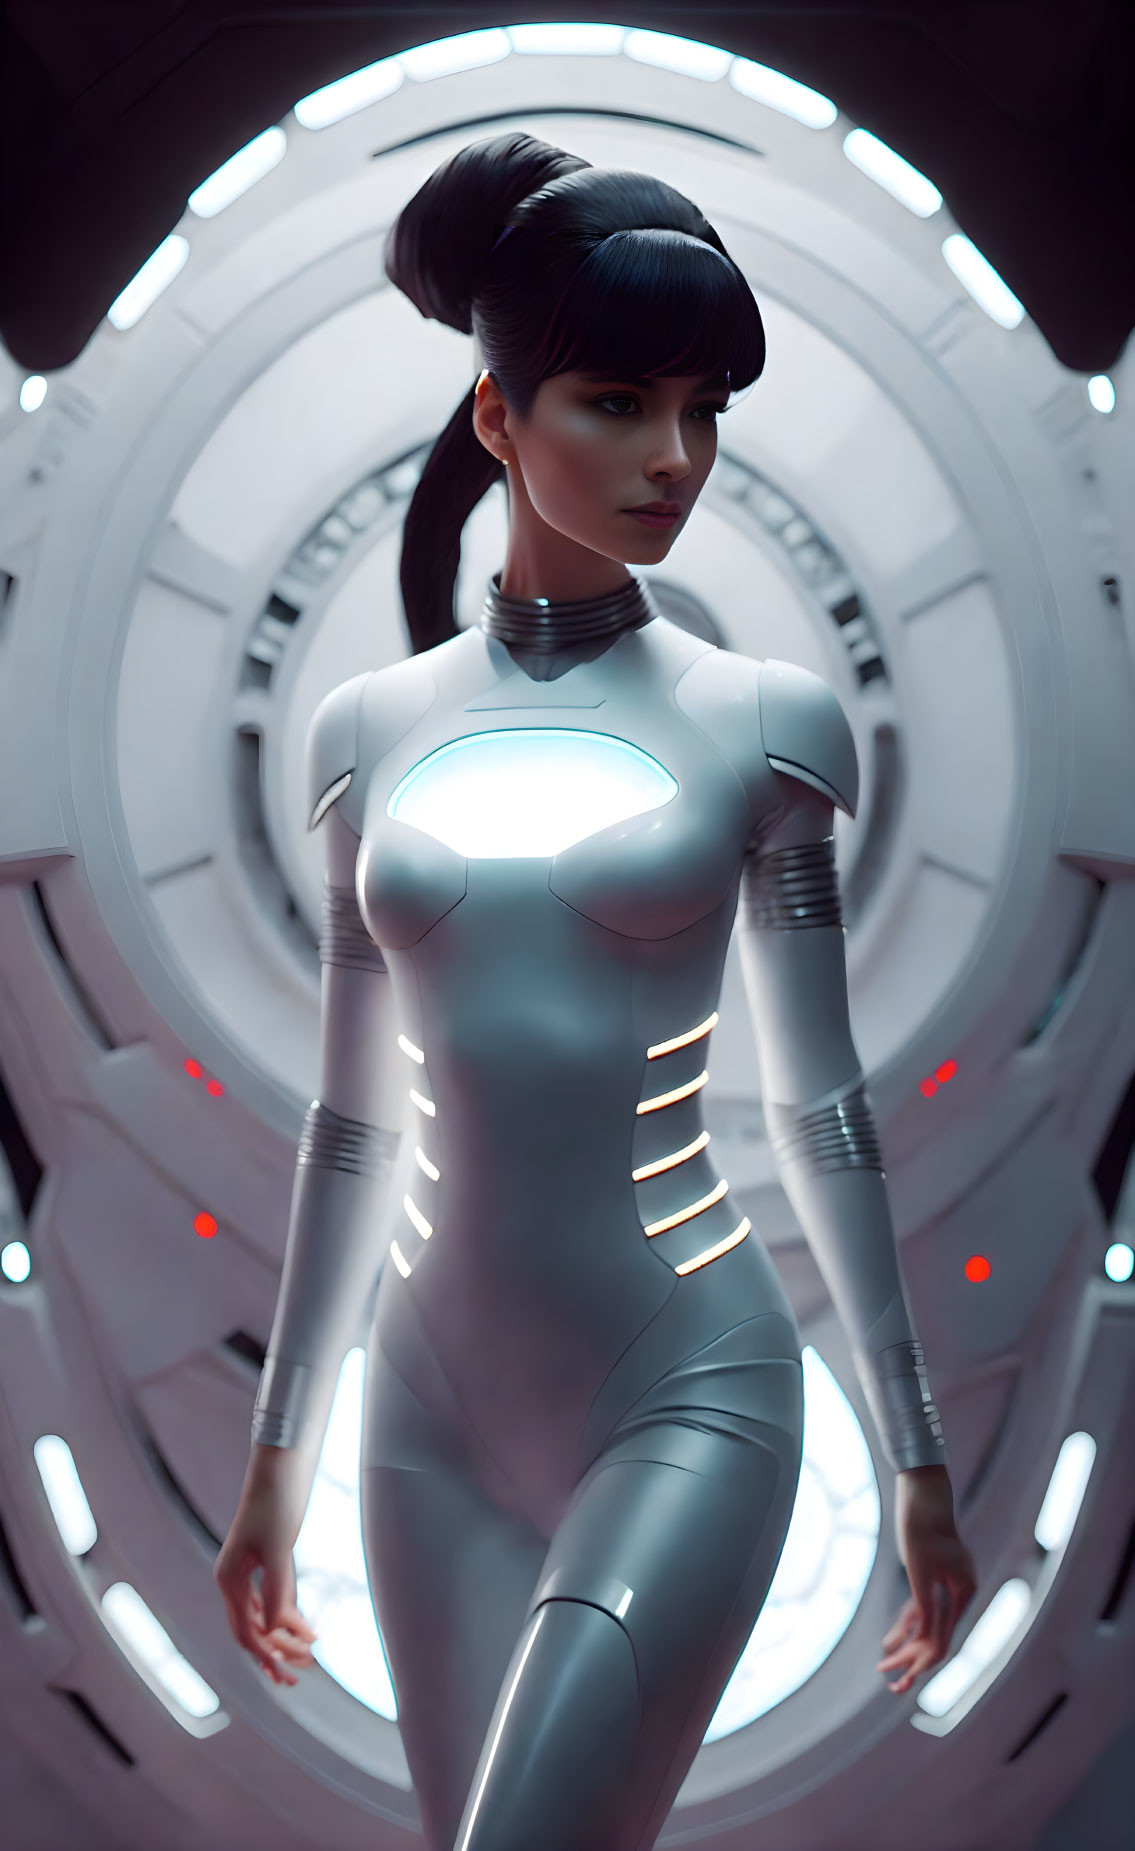 Futuristic woman in sci-fi suit with glowing elements and circular structures